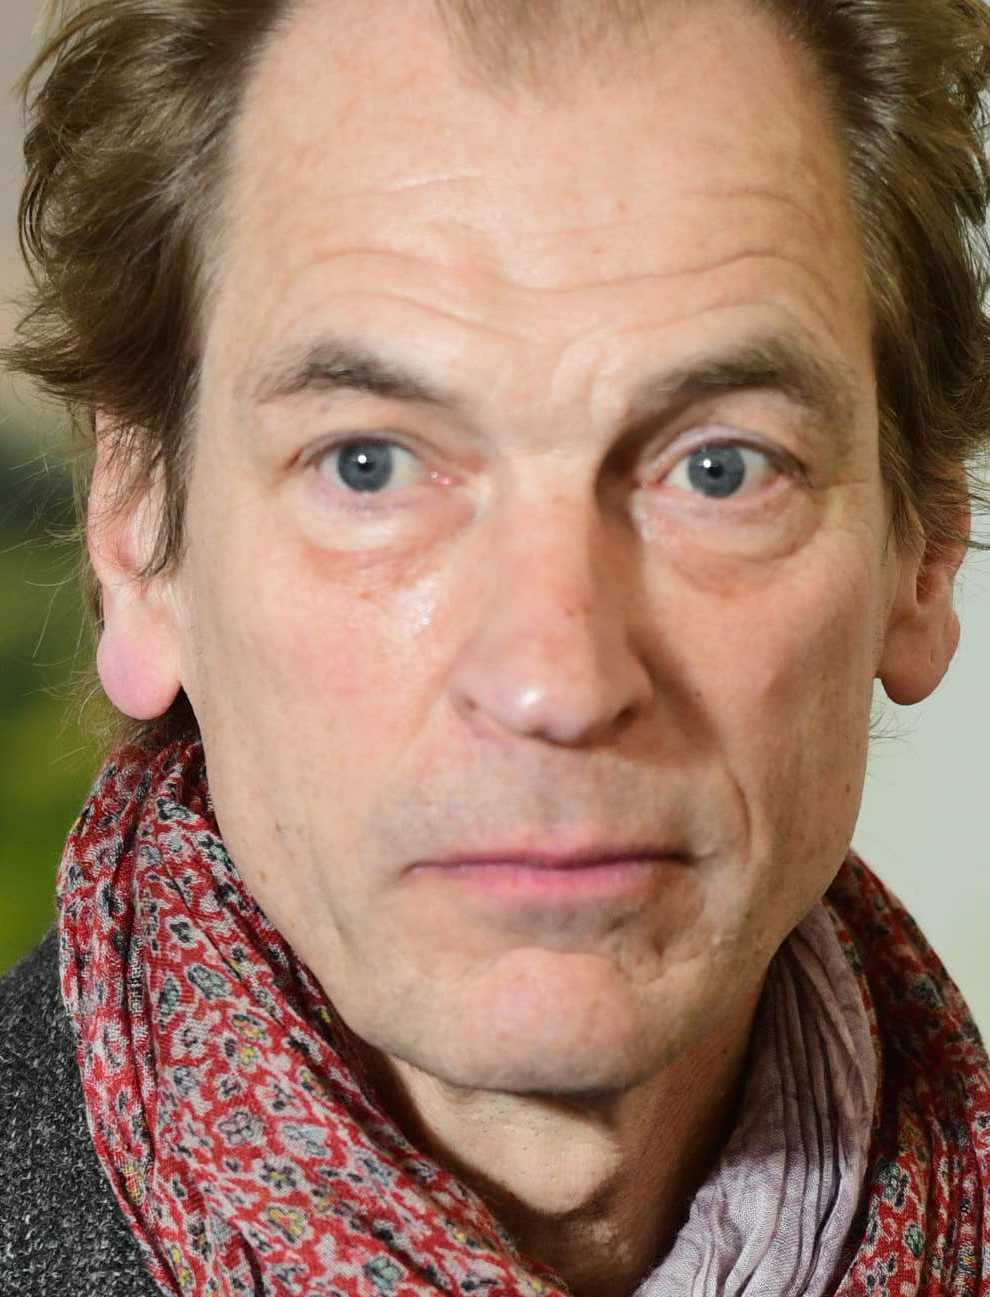 Searches for missing British actor Julian Sands have continued by air only, with authorities using new technology that can detect electronic devices and credit cards (PA)